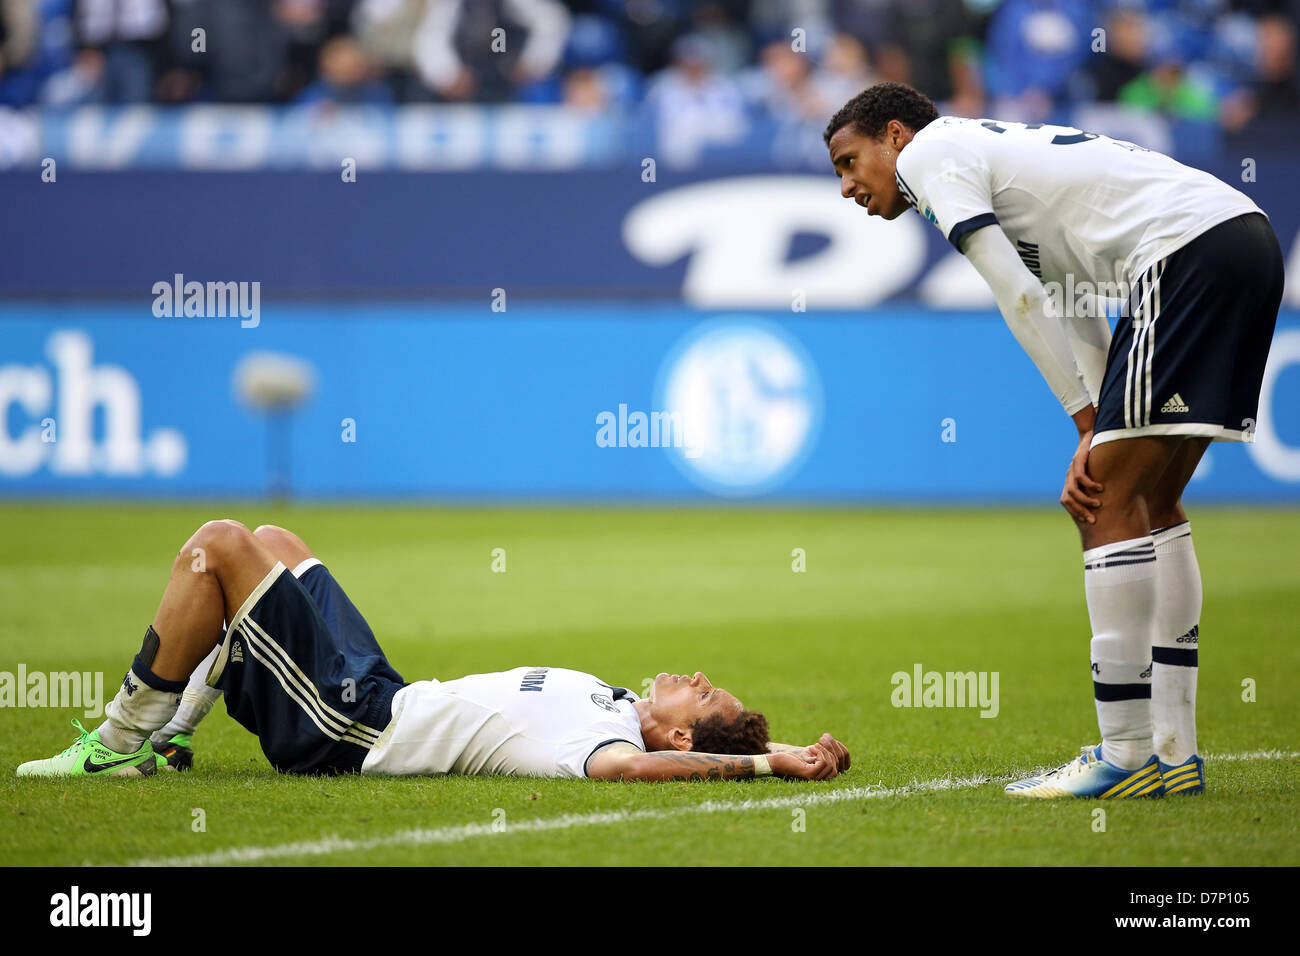 Schalke's Jermaine Jones (L) and Joel Matip  gesture on the pitch after the match FC Schalke 04 and VfB Stuttgart in Veltins-Arena in Gelsenkirchen, Germany, 11 May 2013. PHOTO: KEVIN KUREK   (ATTENTION: EMBARGO CONDITIONS! The DFL permits the further utilisation of up to 15 pictures only (no sequntial pictures or video-similar series of pictures allowed) via the internet and online media during the match (including halftime), taken from inside the stadium and/or prior to the start of the match. The DFL permits the unrestricted transmission of digitised recordings during the match exclusively  Stock Photo